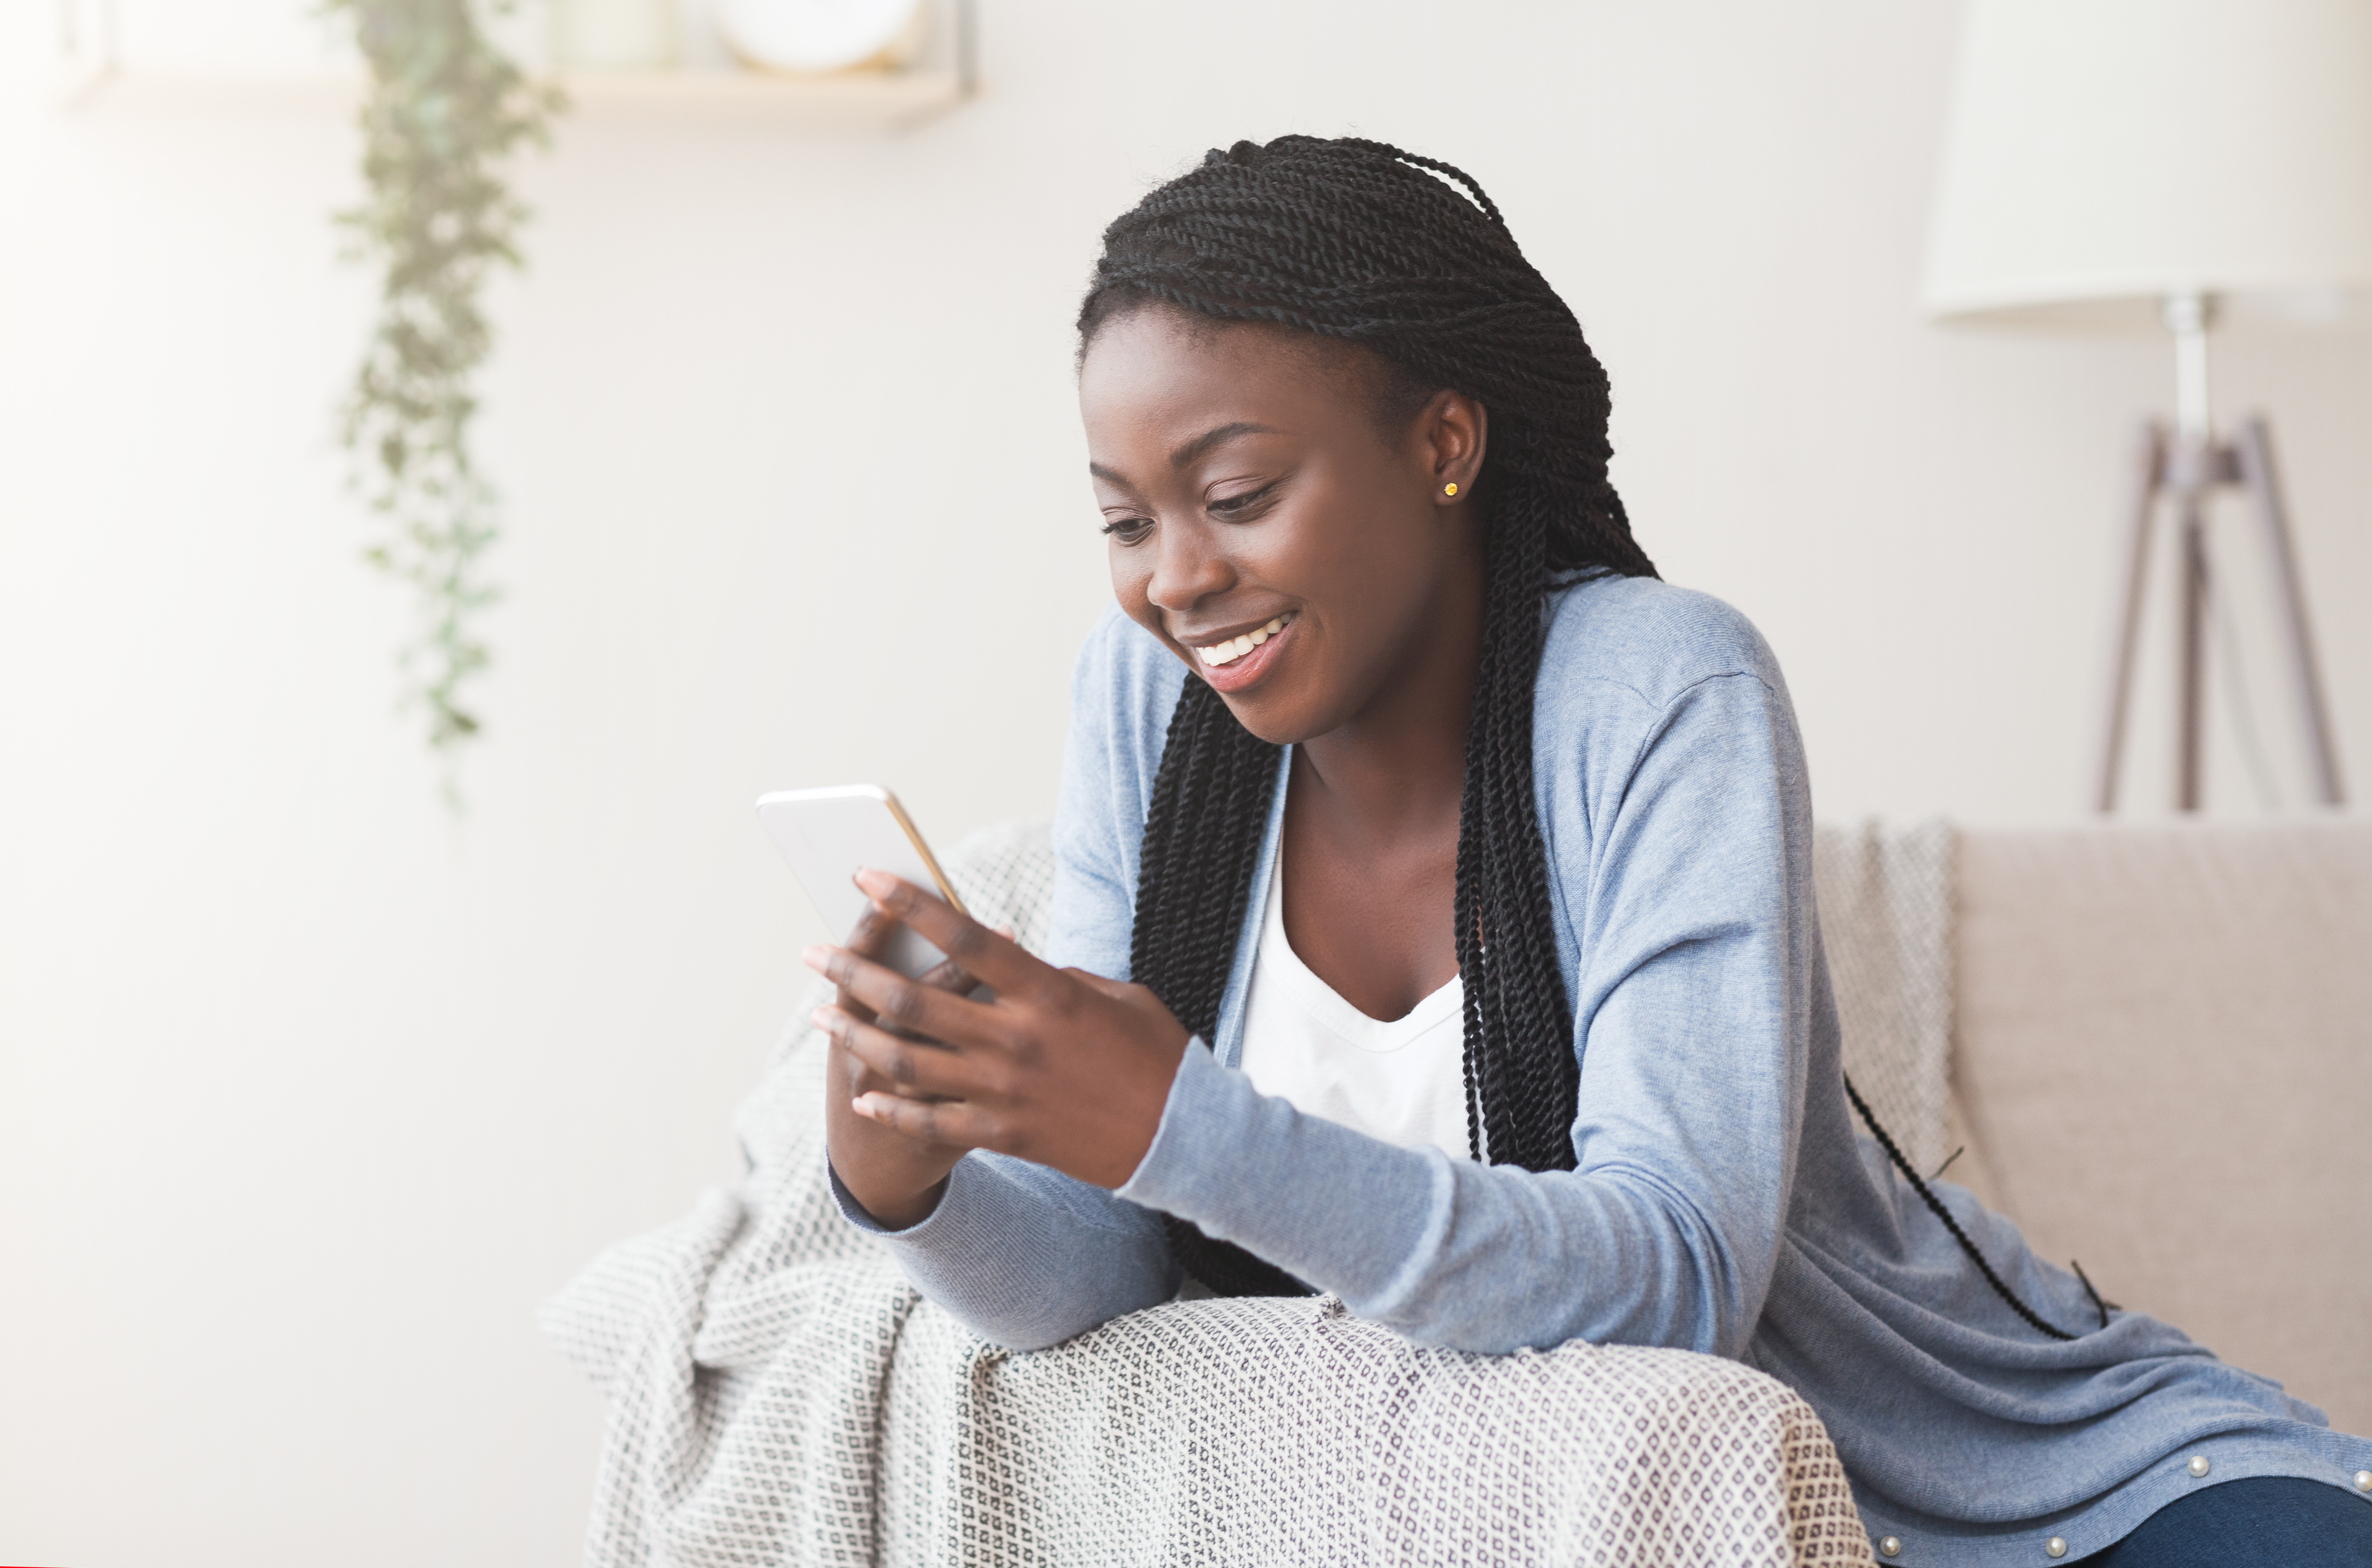 With online training, caregivers are able to learn in their preferred language and on their own time. Image Description: Woman smiling at her phone.